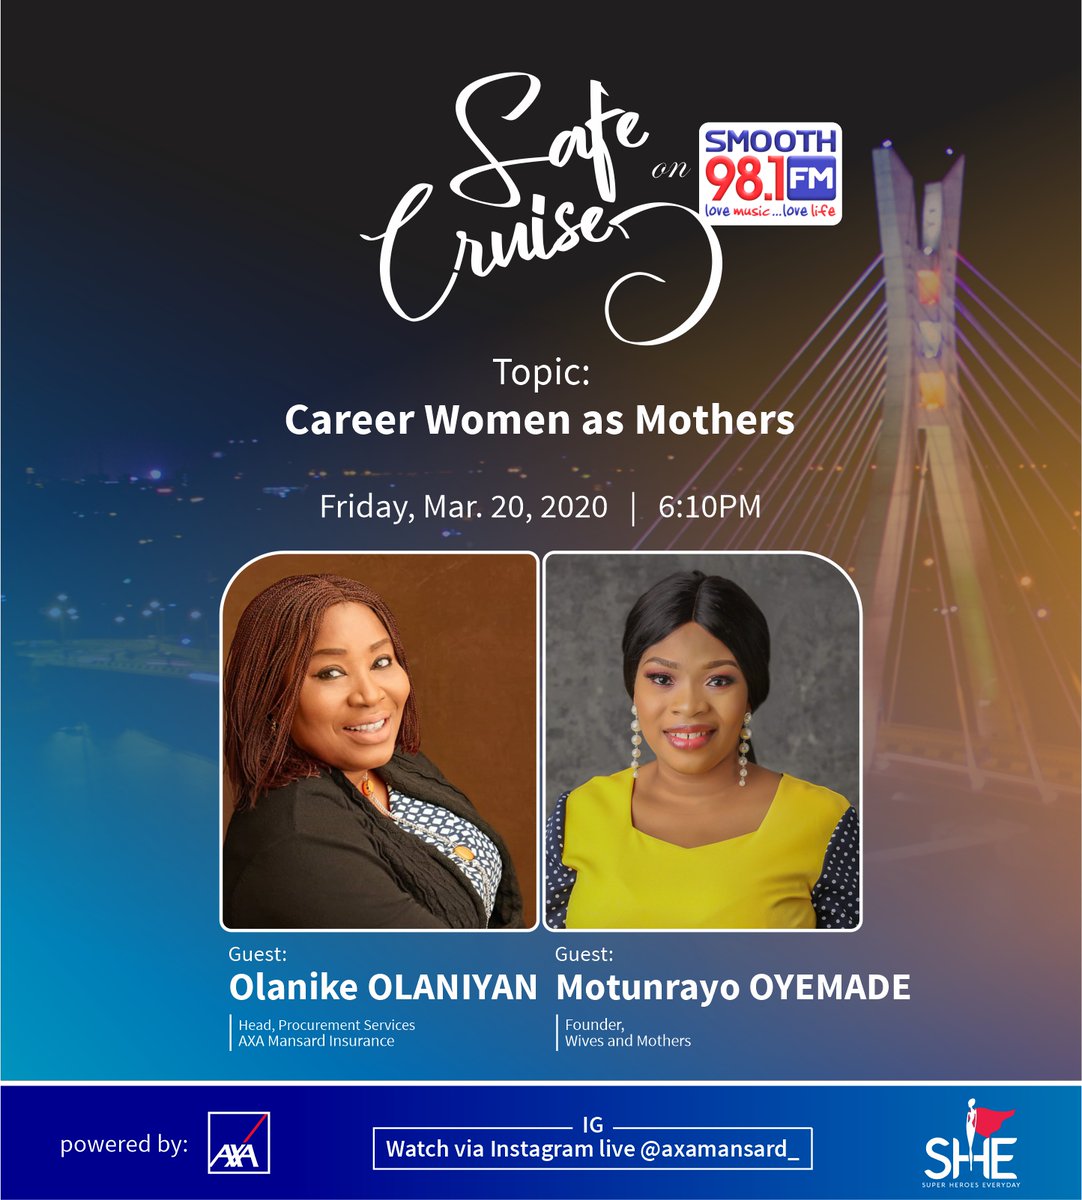 This week on #AXAMansardSafeCruise we discuss 'Career Women as Mothers'. It promises to be a very interesting conversation. Join us on Friday at 6:10PM on Friday.
#AXAMansard #KnowYouCan #SafeCruise #IWD2020 #IWD #InternationalWomensDay2020 #WomensMonth